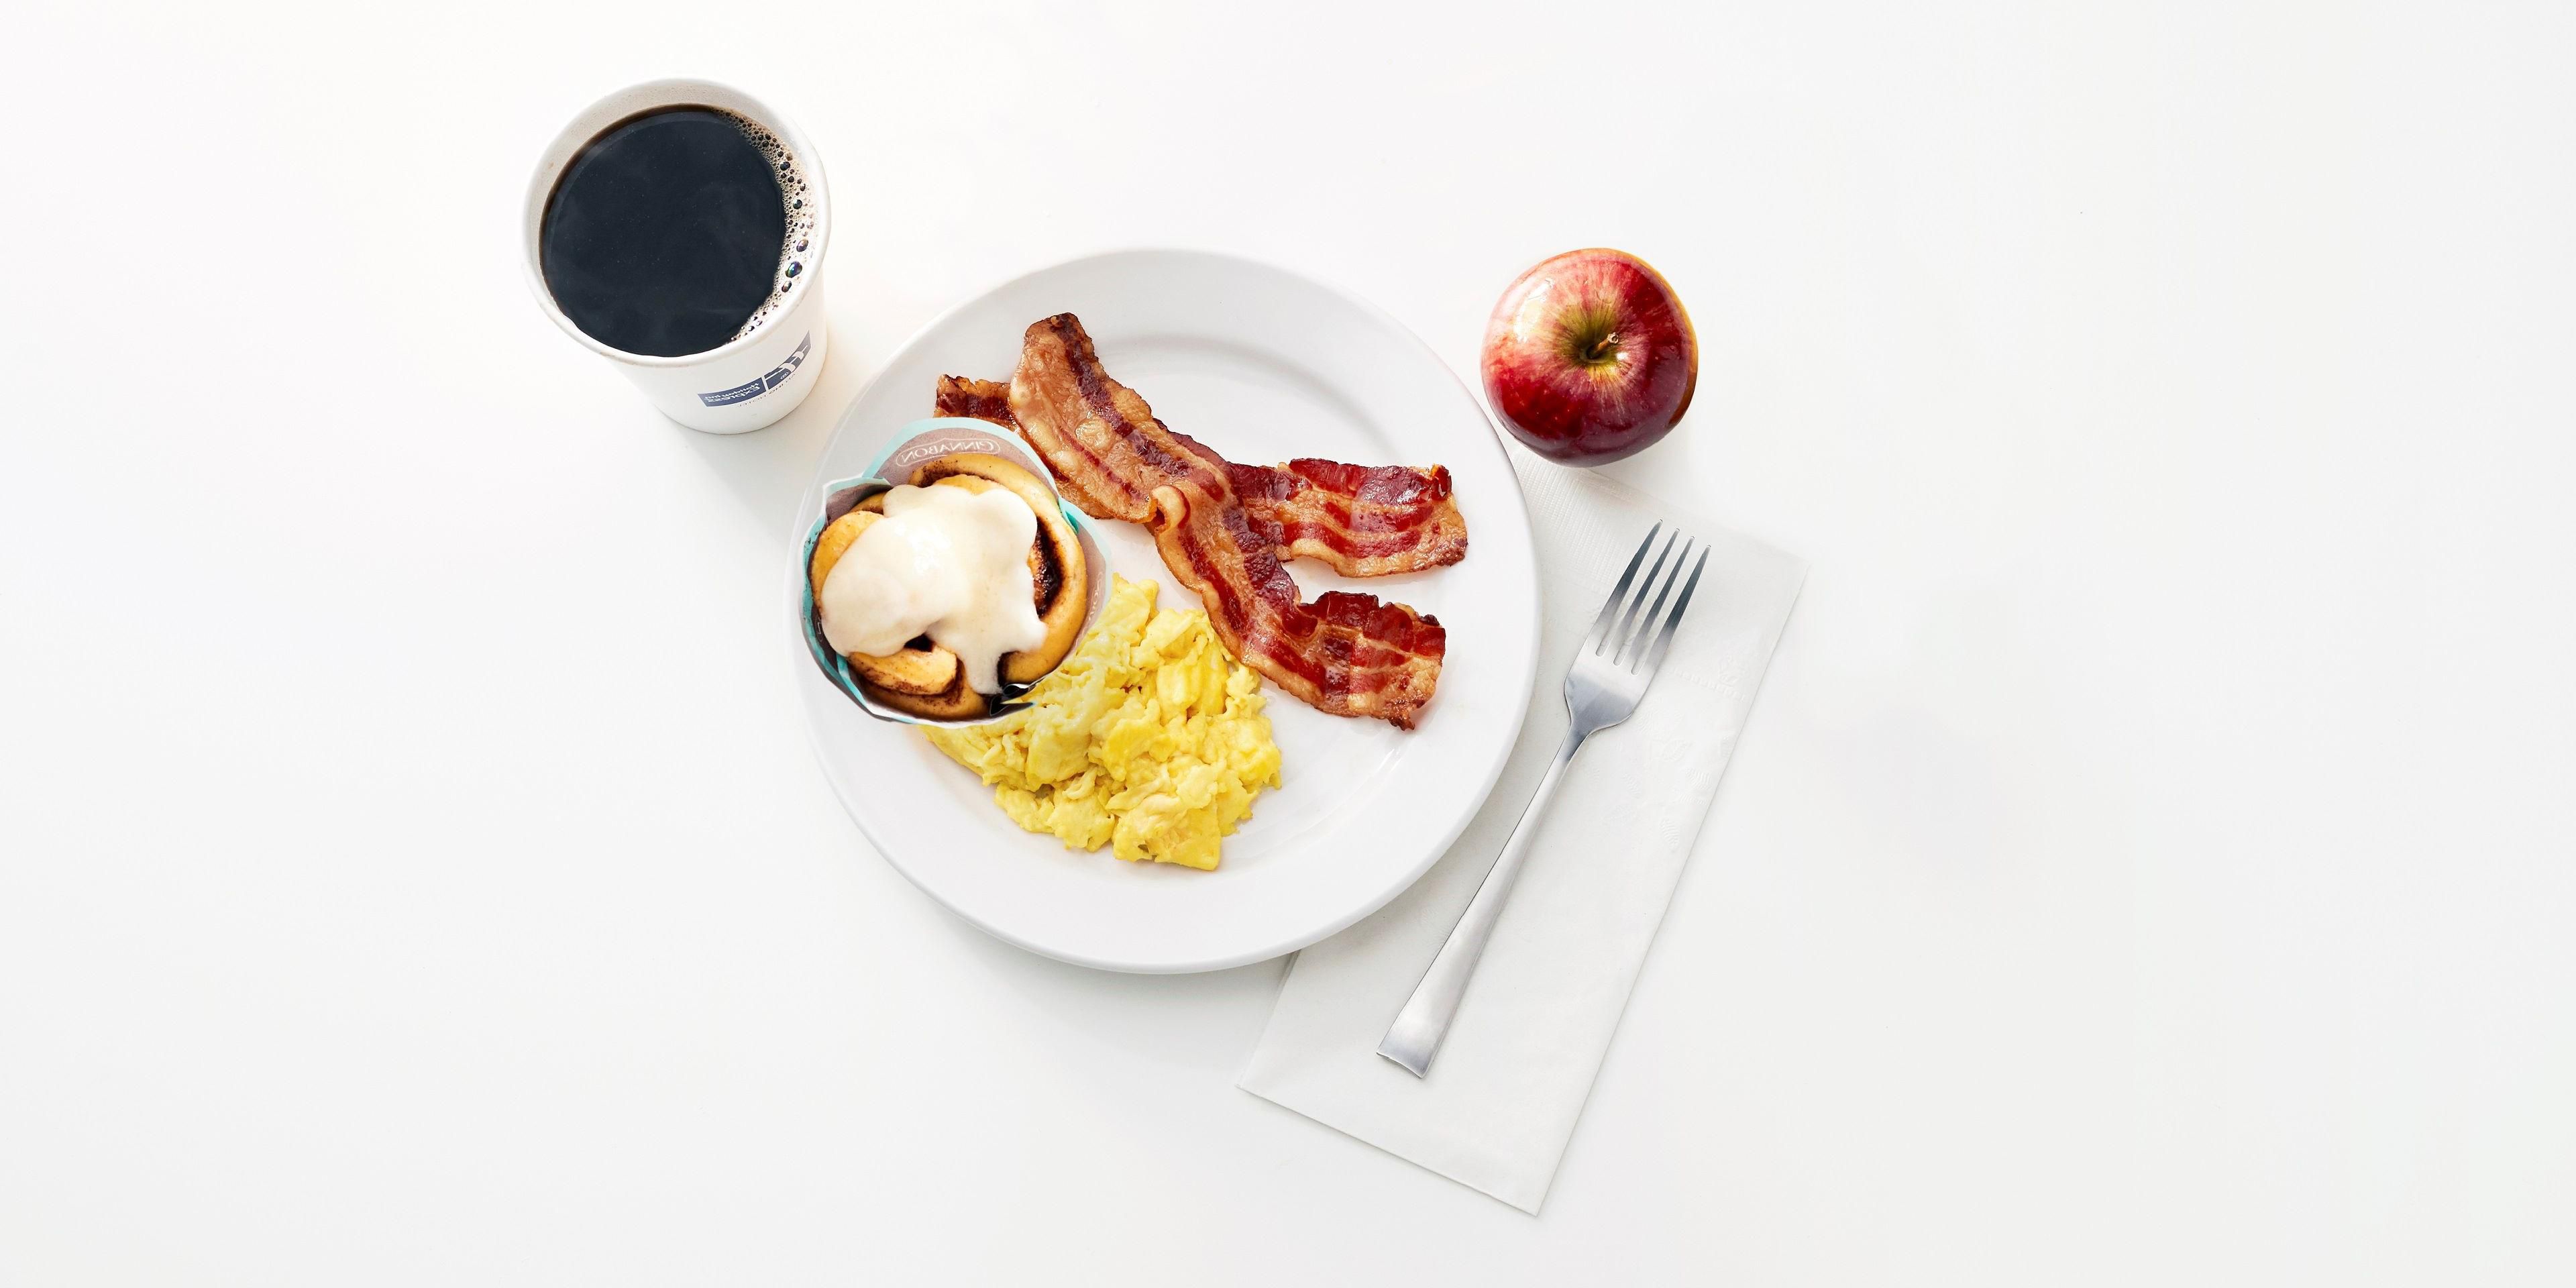 Kick start your day with our free Express Start Breakfast, with grab ‘n’ go options and favorites such as eggs and bacon, hot pancakes, our signature cinnamon rolls and fresh coffee. Offered Monday - Friday from 6:00 AM to 9:30 AM, and Saturday - Sunday from 7:00 AM to 10:00 AM.